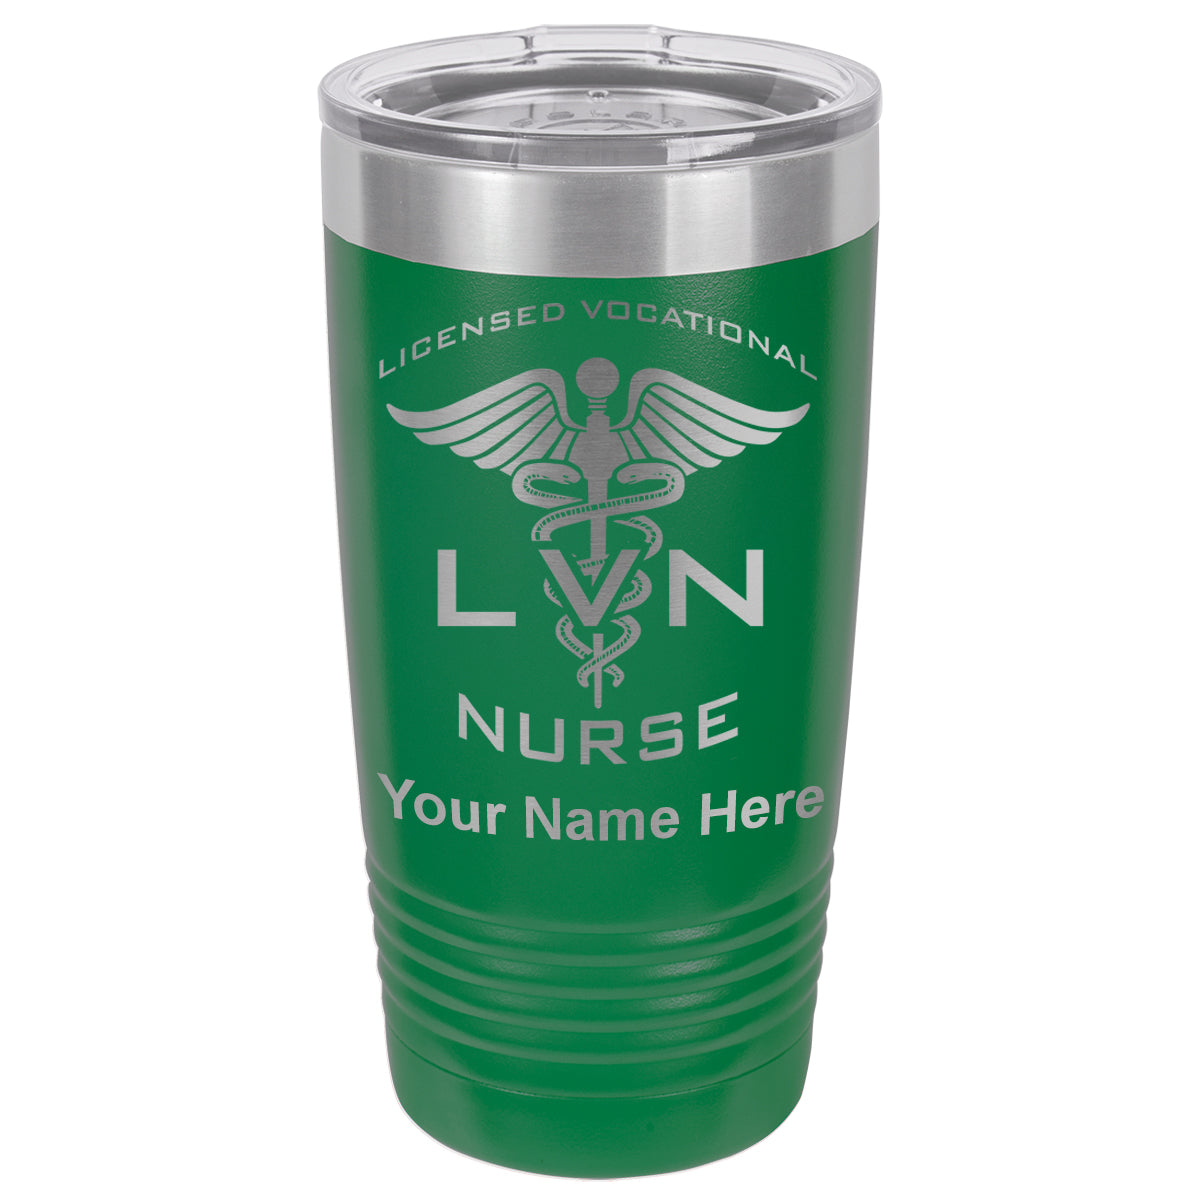 20oz Vacuum Insulated Tumbler Mug, LVN Licensed Vocational Nurse, Personalized Engraving Included